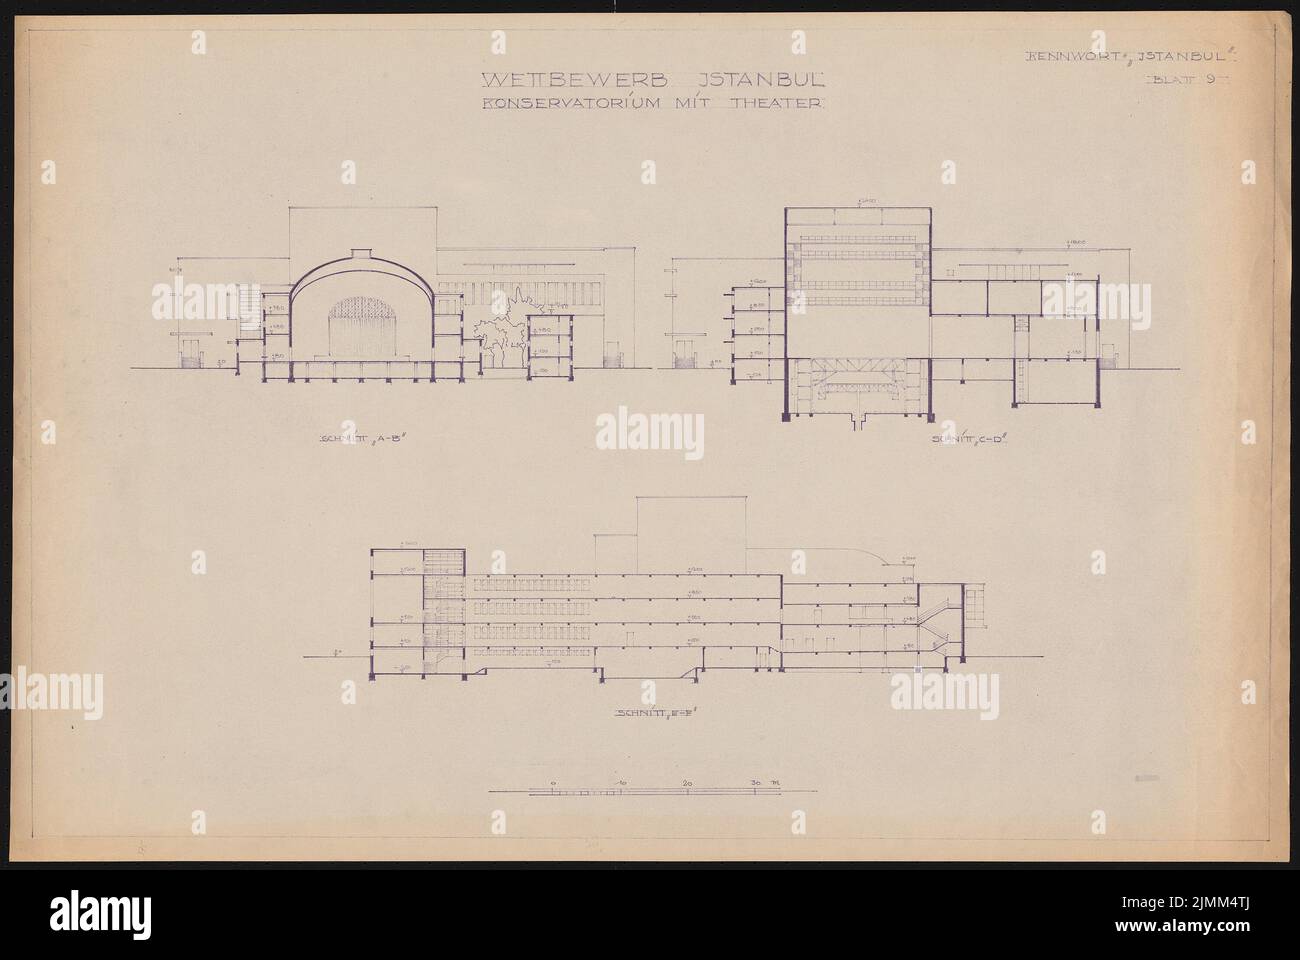 Poelzig Hans (1869-1936), Conservatory with Theater, Istanbul (1935): Cut A-B, C-D, E-F 1: 200 (see Inv.No. 5284). Light break on paper, 64.7 x 96.7 cm (including scan edges) Stock Photo